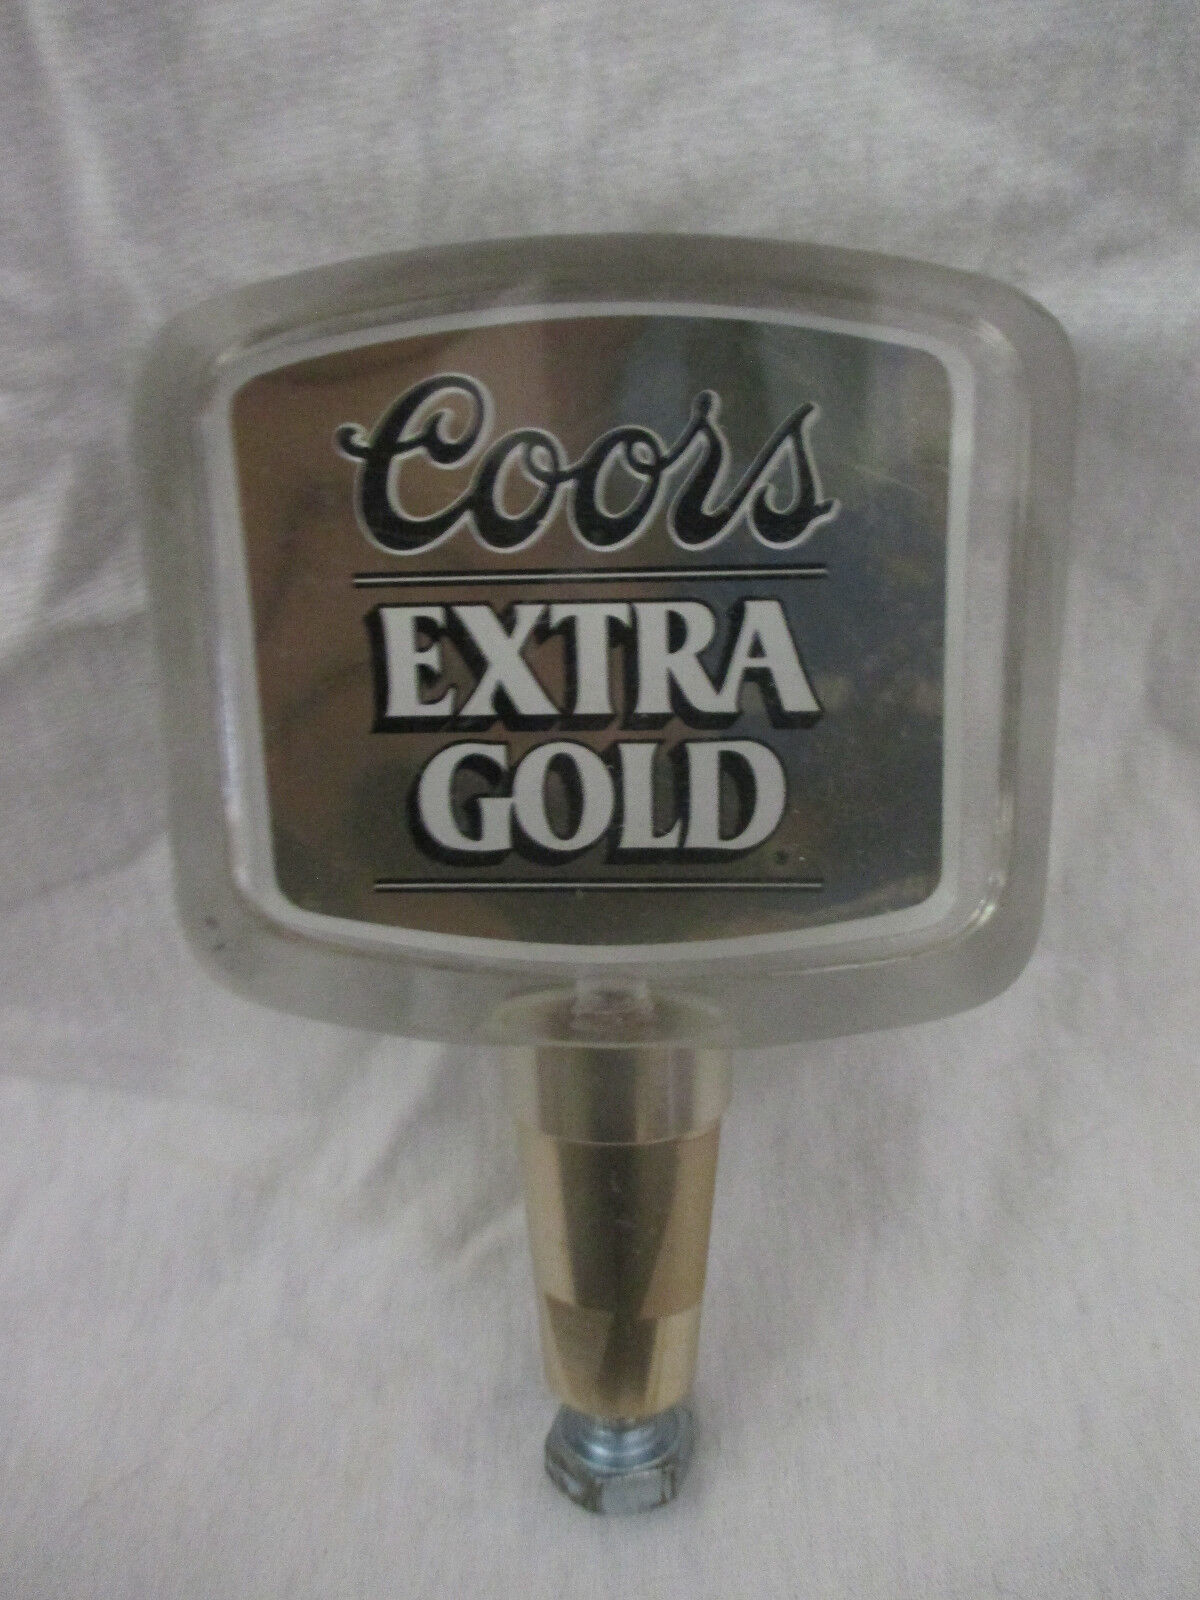 Coors Extra Gold Tap Handle